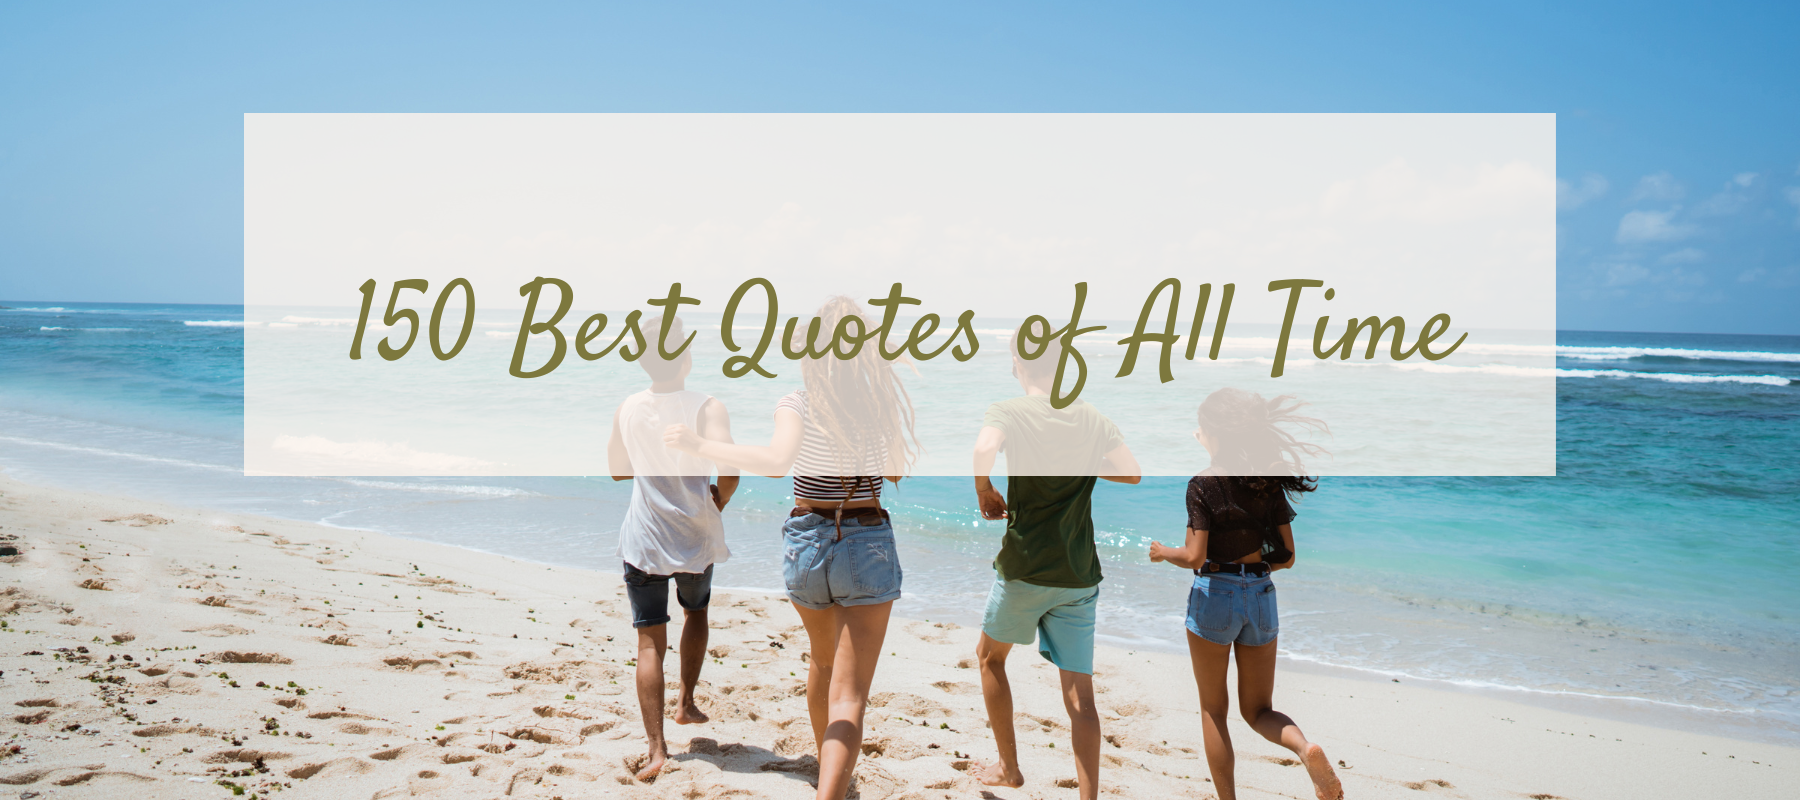 Inspiring Time Quotes: 150+ Best Quotes About Time